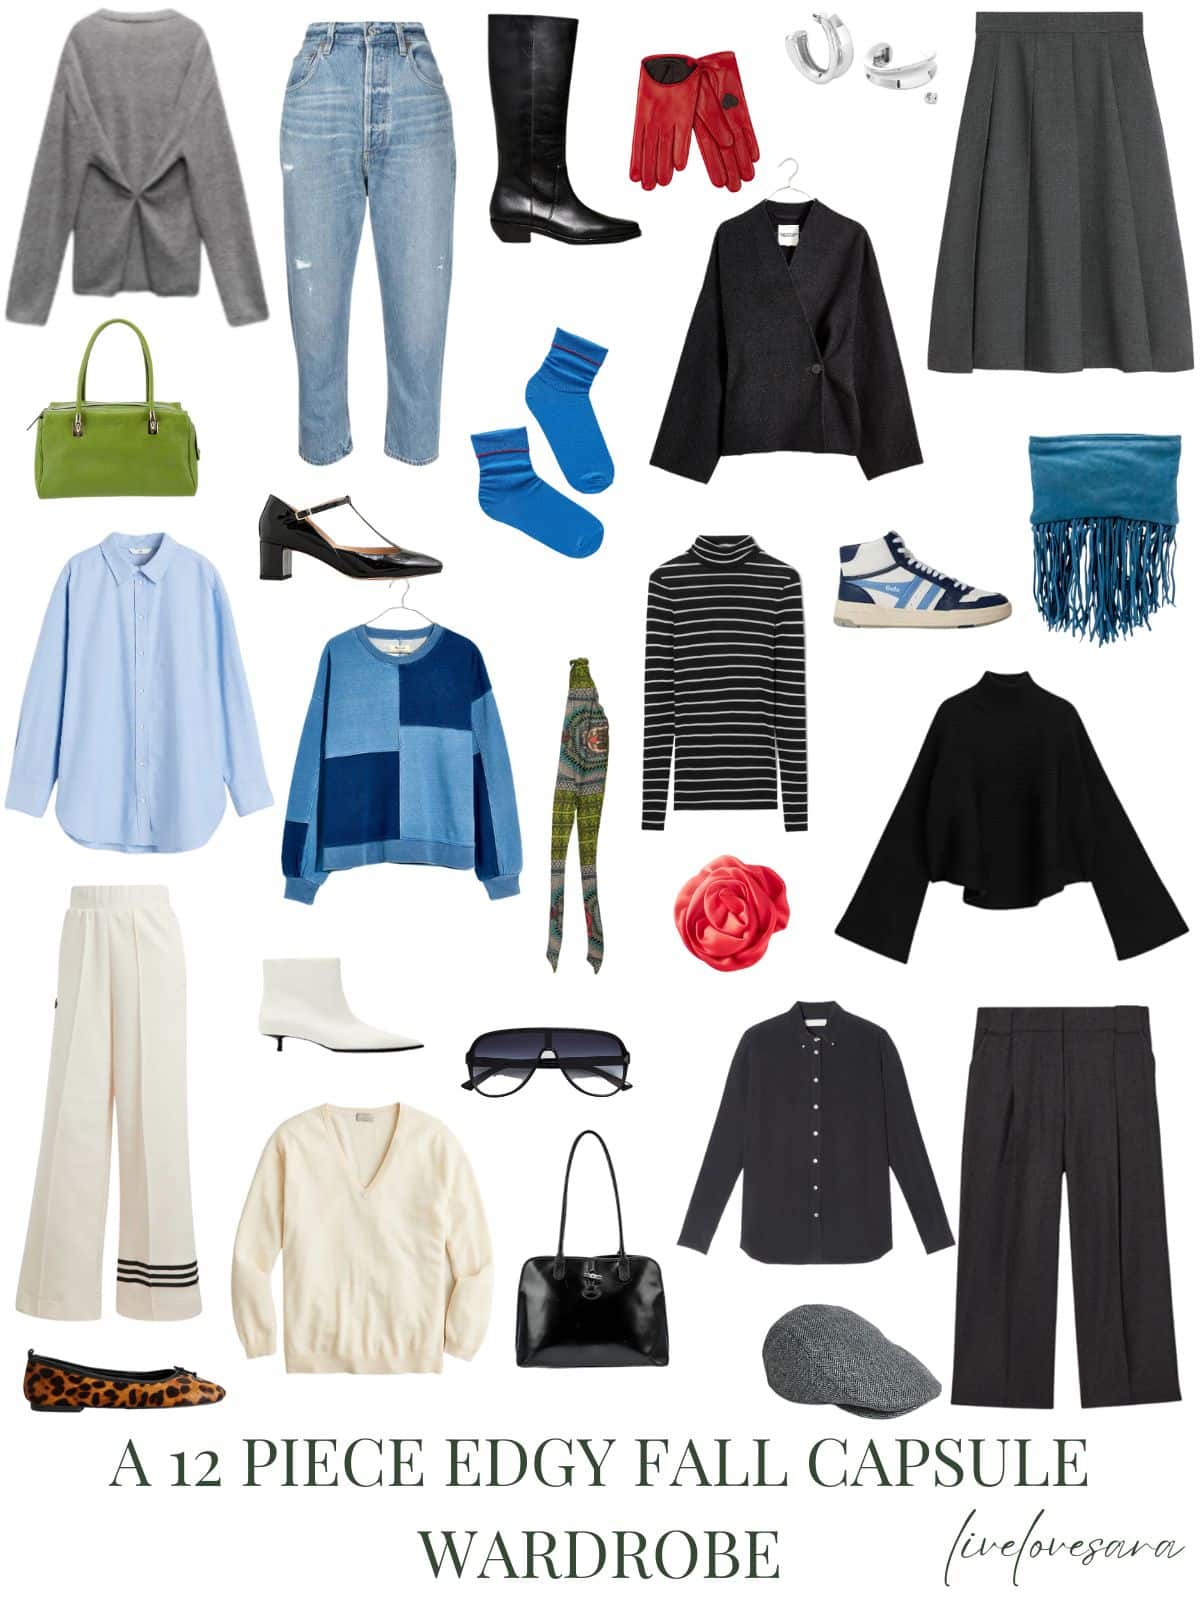 A white background with 12 outfits for a 12 Piece Edgy Fall Capsule Wardrobe.